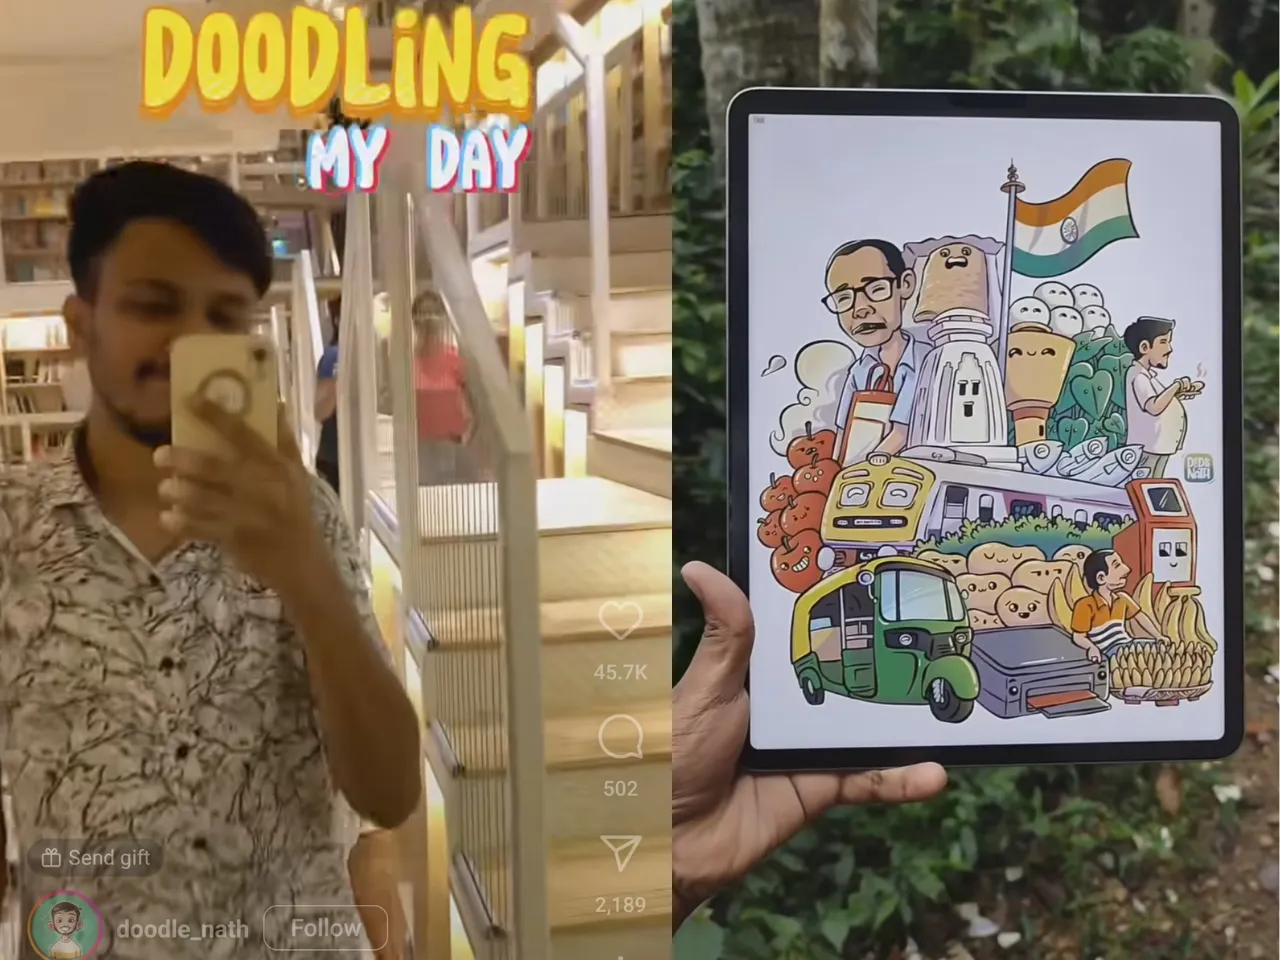 "Doodle Your Day" trend captures the beauty around us with each stroke